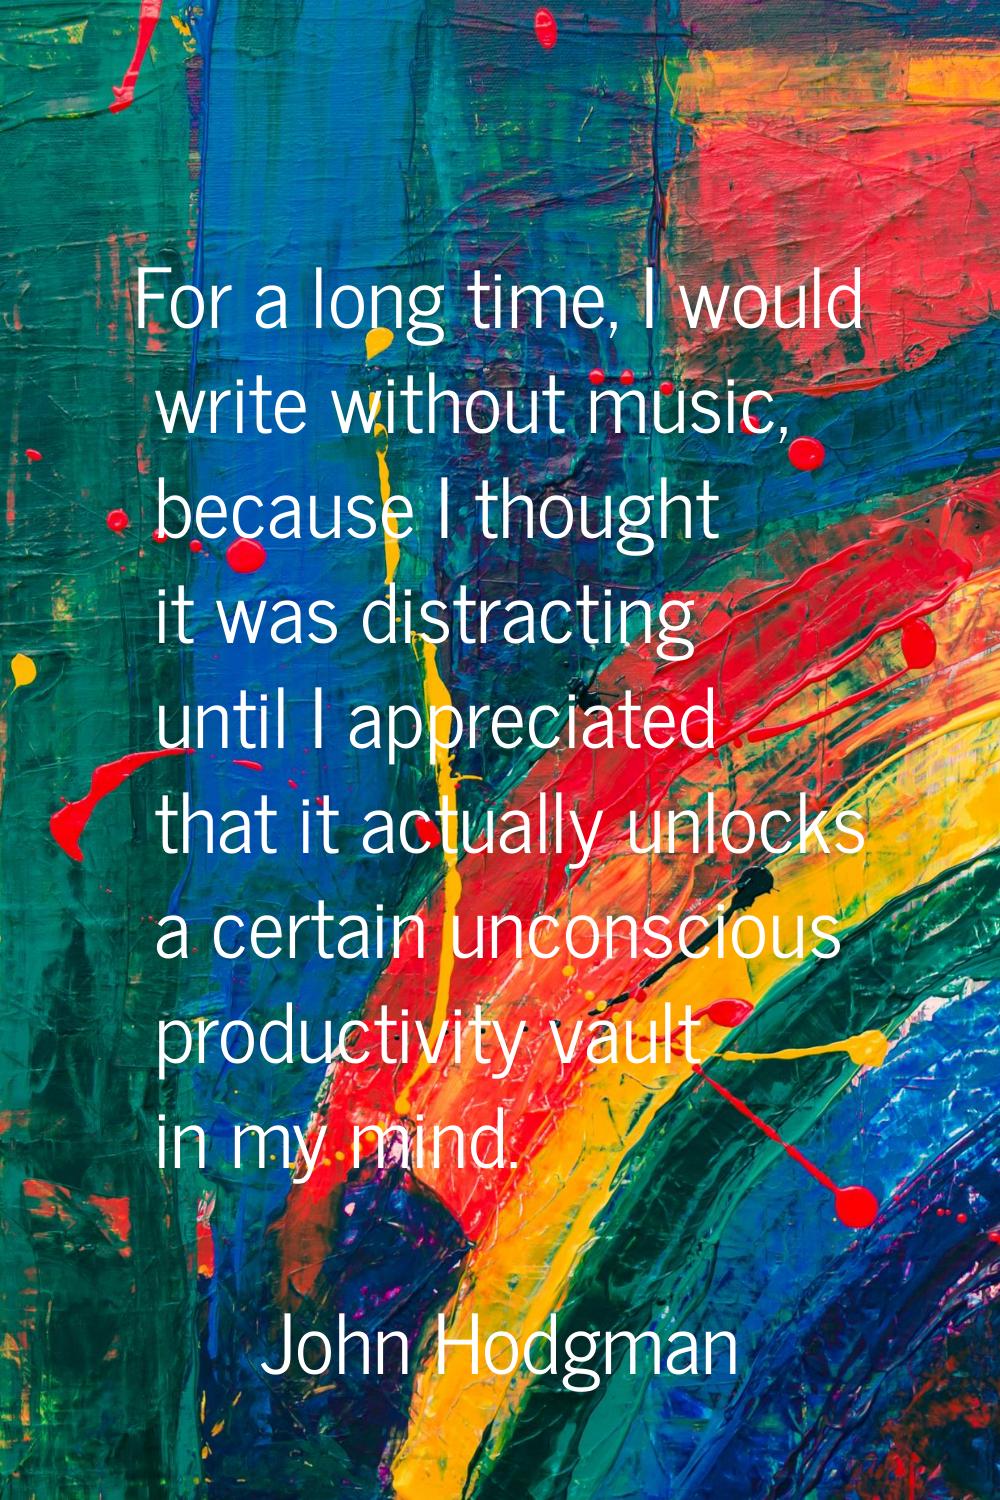 For a long time, I would write without music, because I thought it was distracting until I apprecia